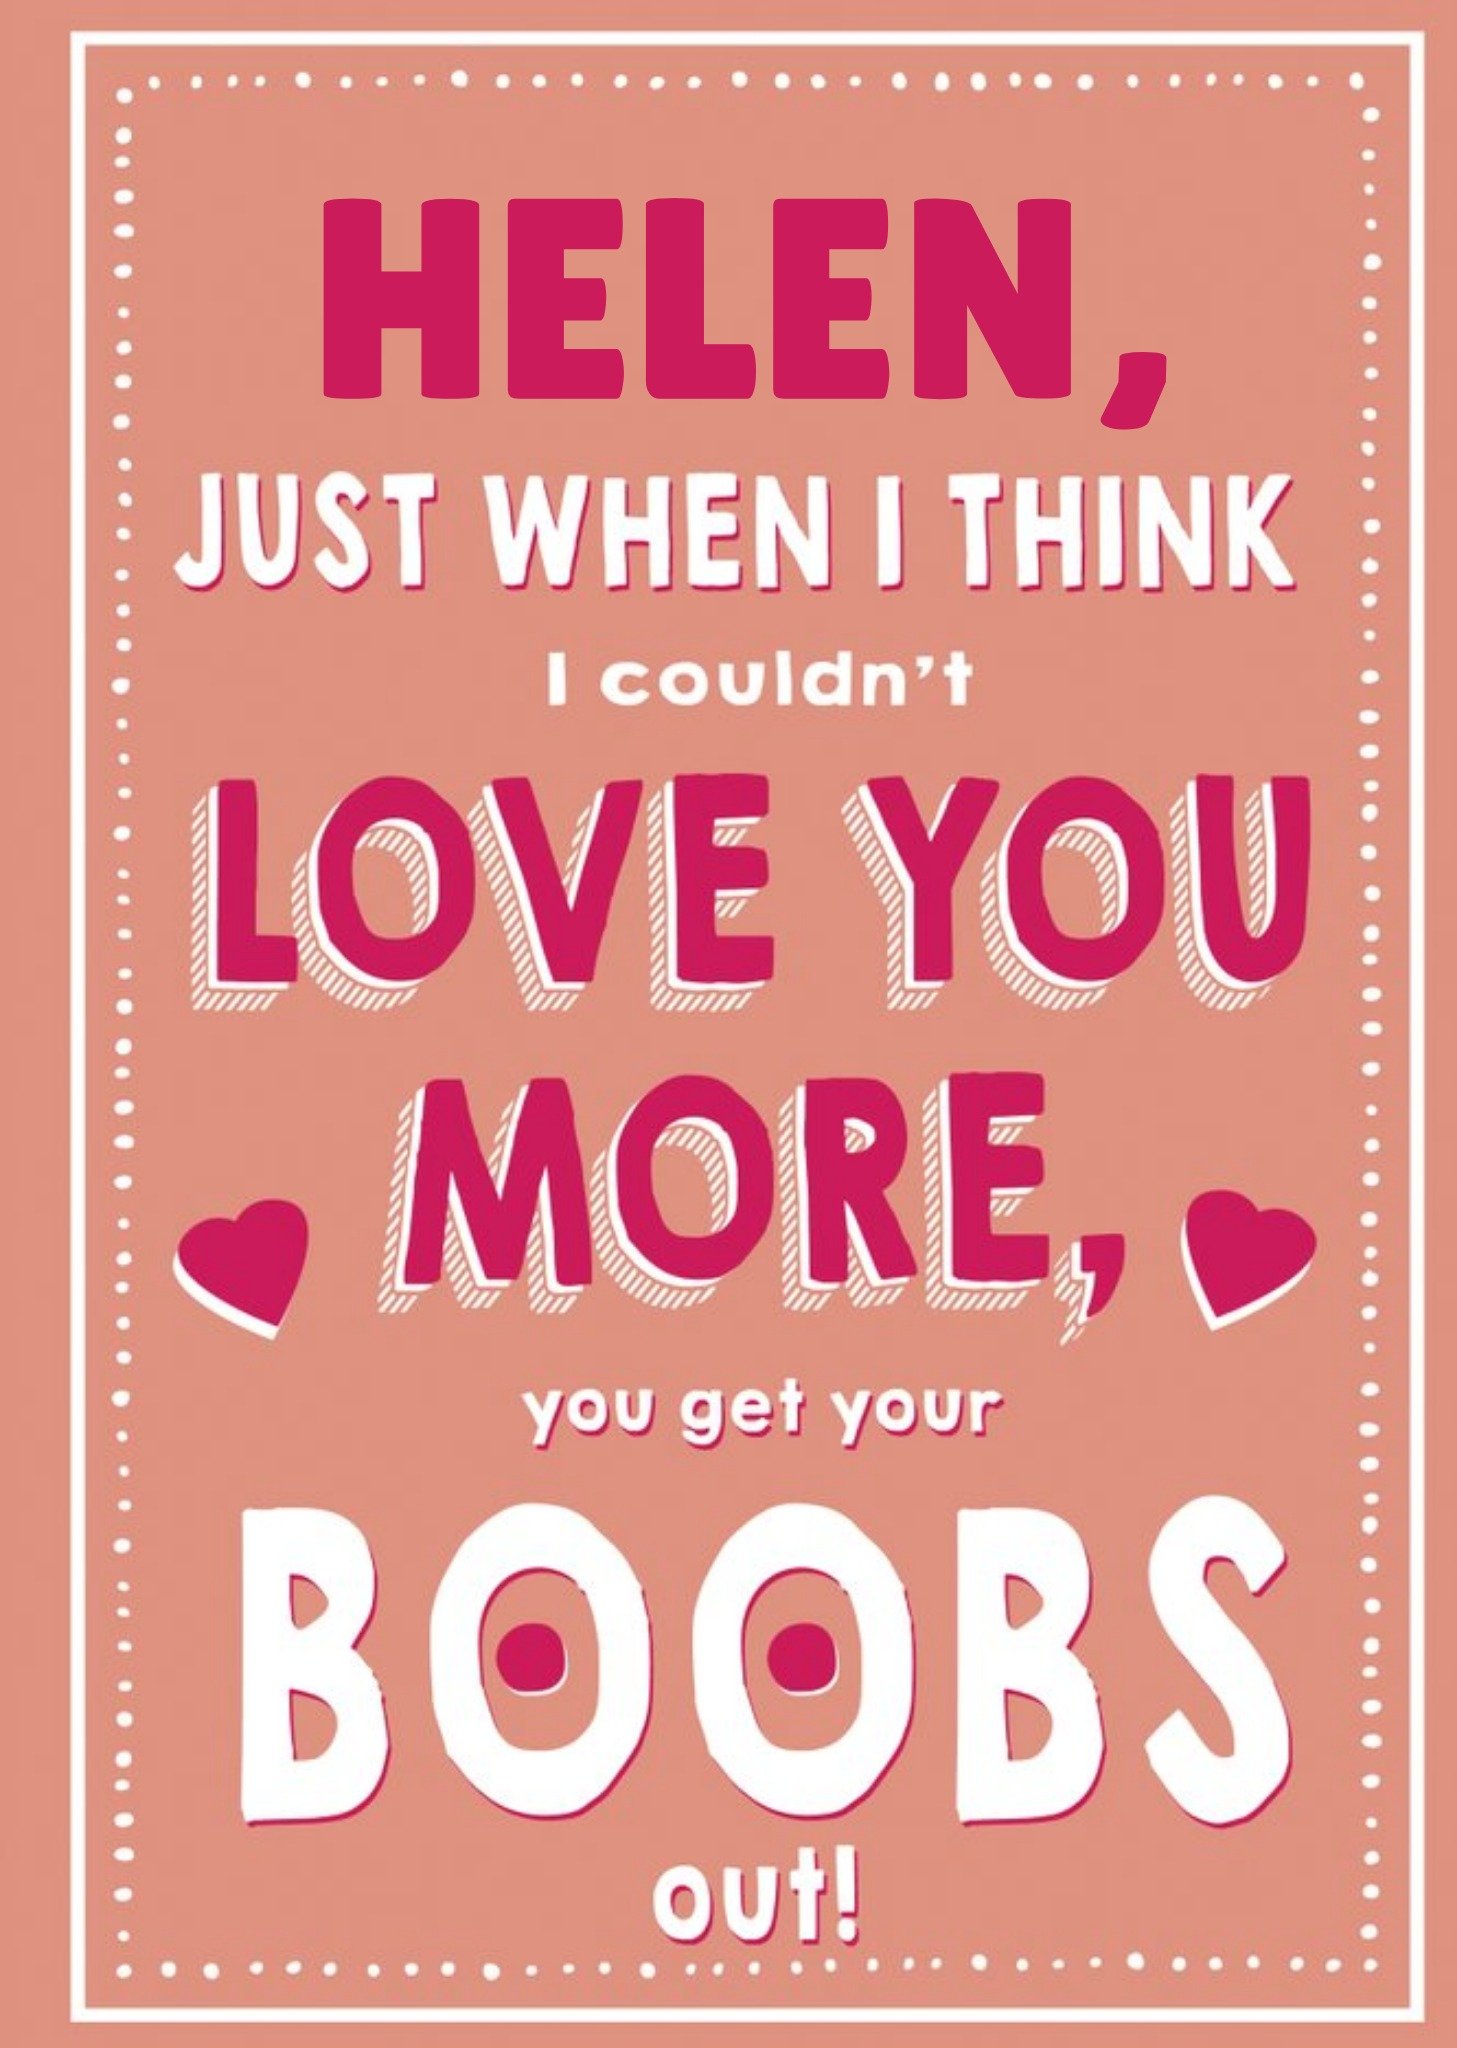 Moonpig Jam And Toast Couldn't Love You More Funny Valentines Day Card Ecard